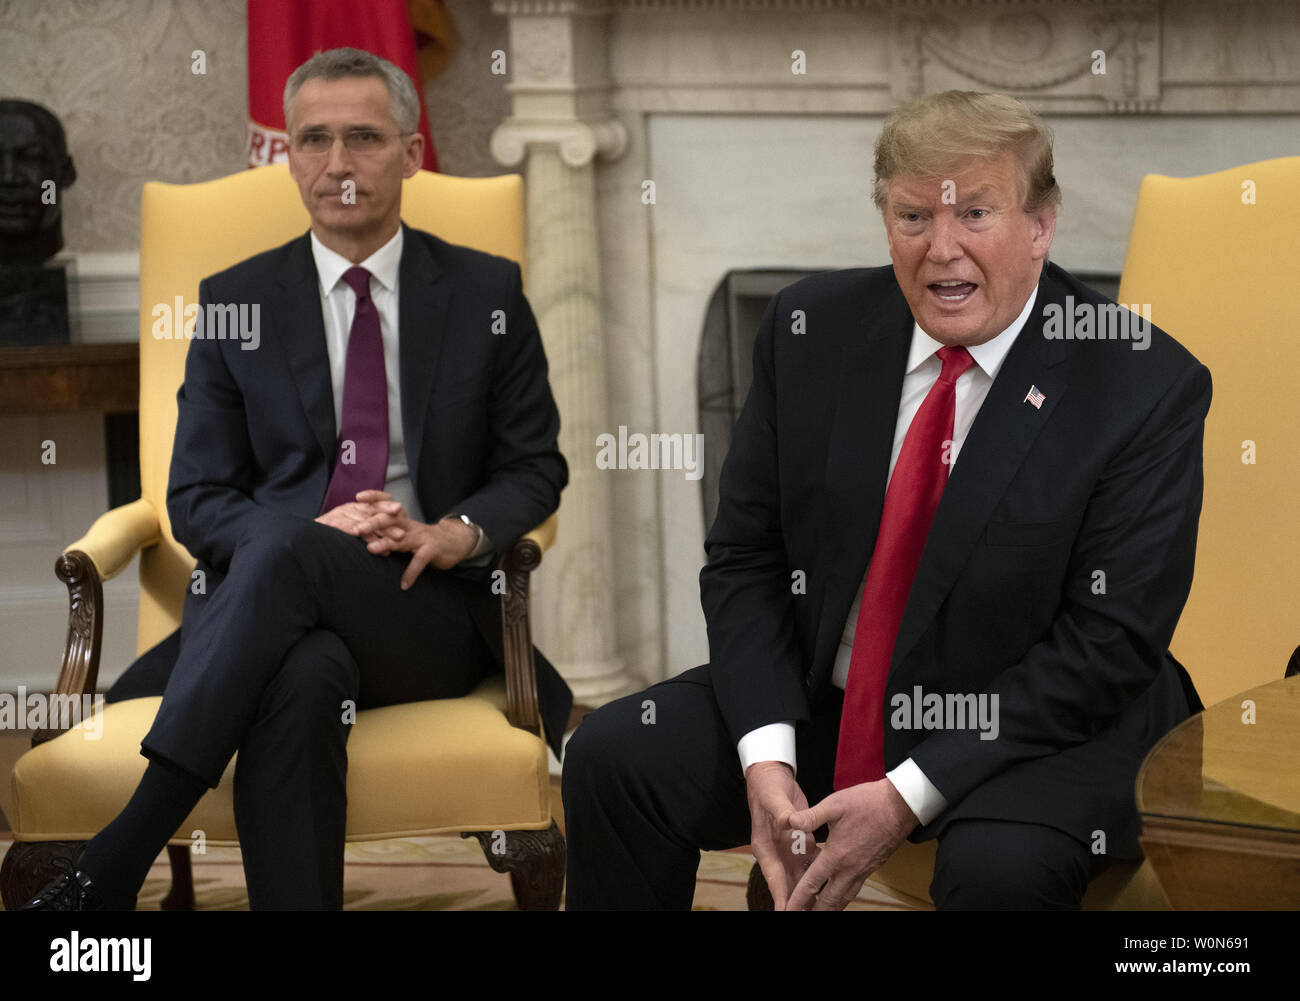 United States President Donald Trump meets Jens Stoltenberg, Secretary General of the North Atlantic Treaty Organization (NATO), in the Oval Office of the White House in Washington, DC on Tuesday, April 2, 2019.   Photo by Ron Sachs/UPI Stock Photo